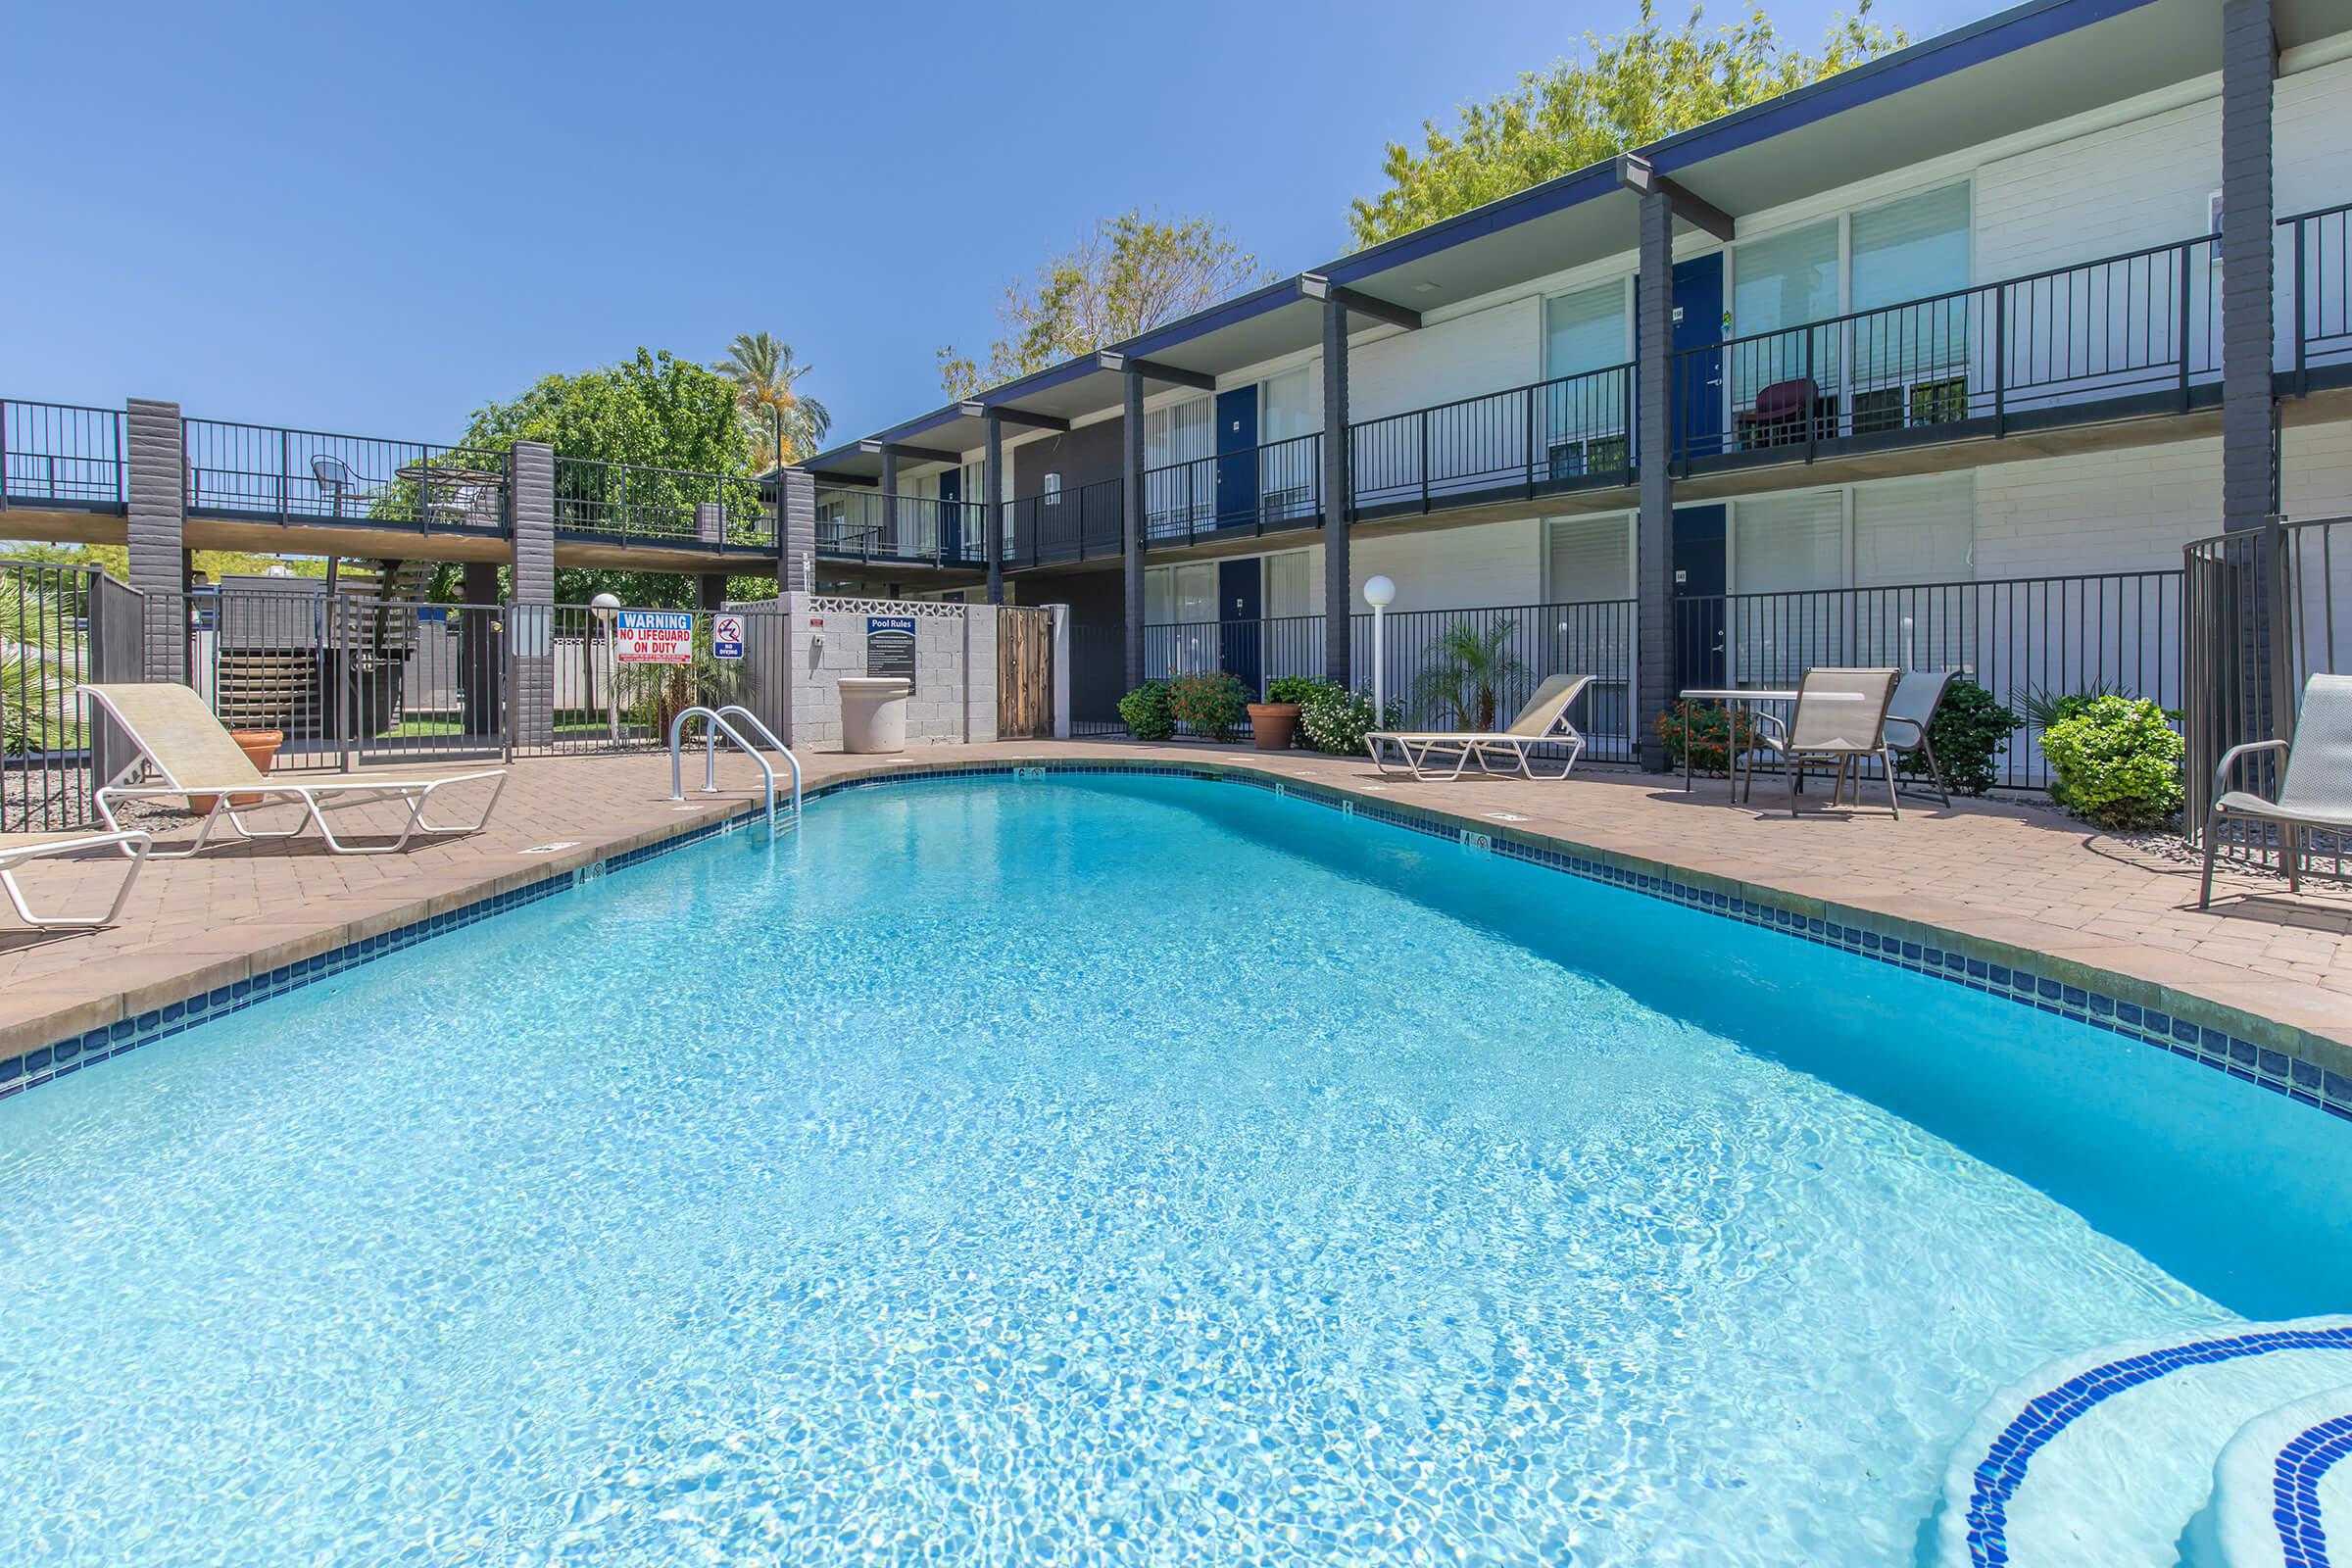 Blue outdoor swimming pool surrounded by apartment complex